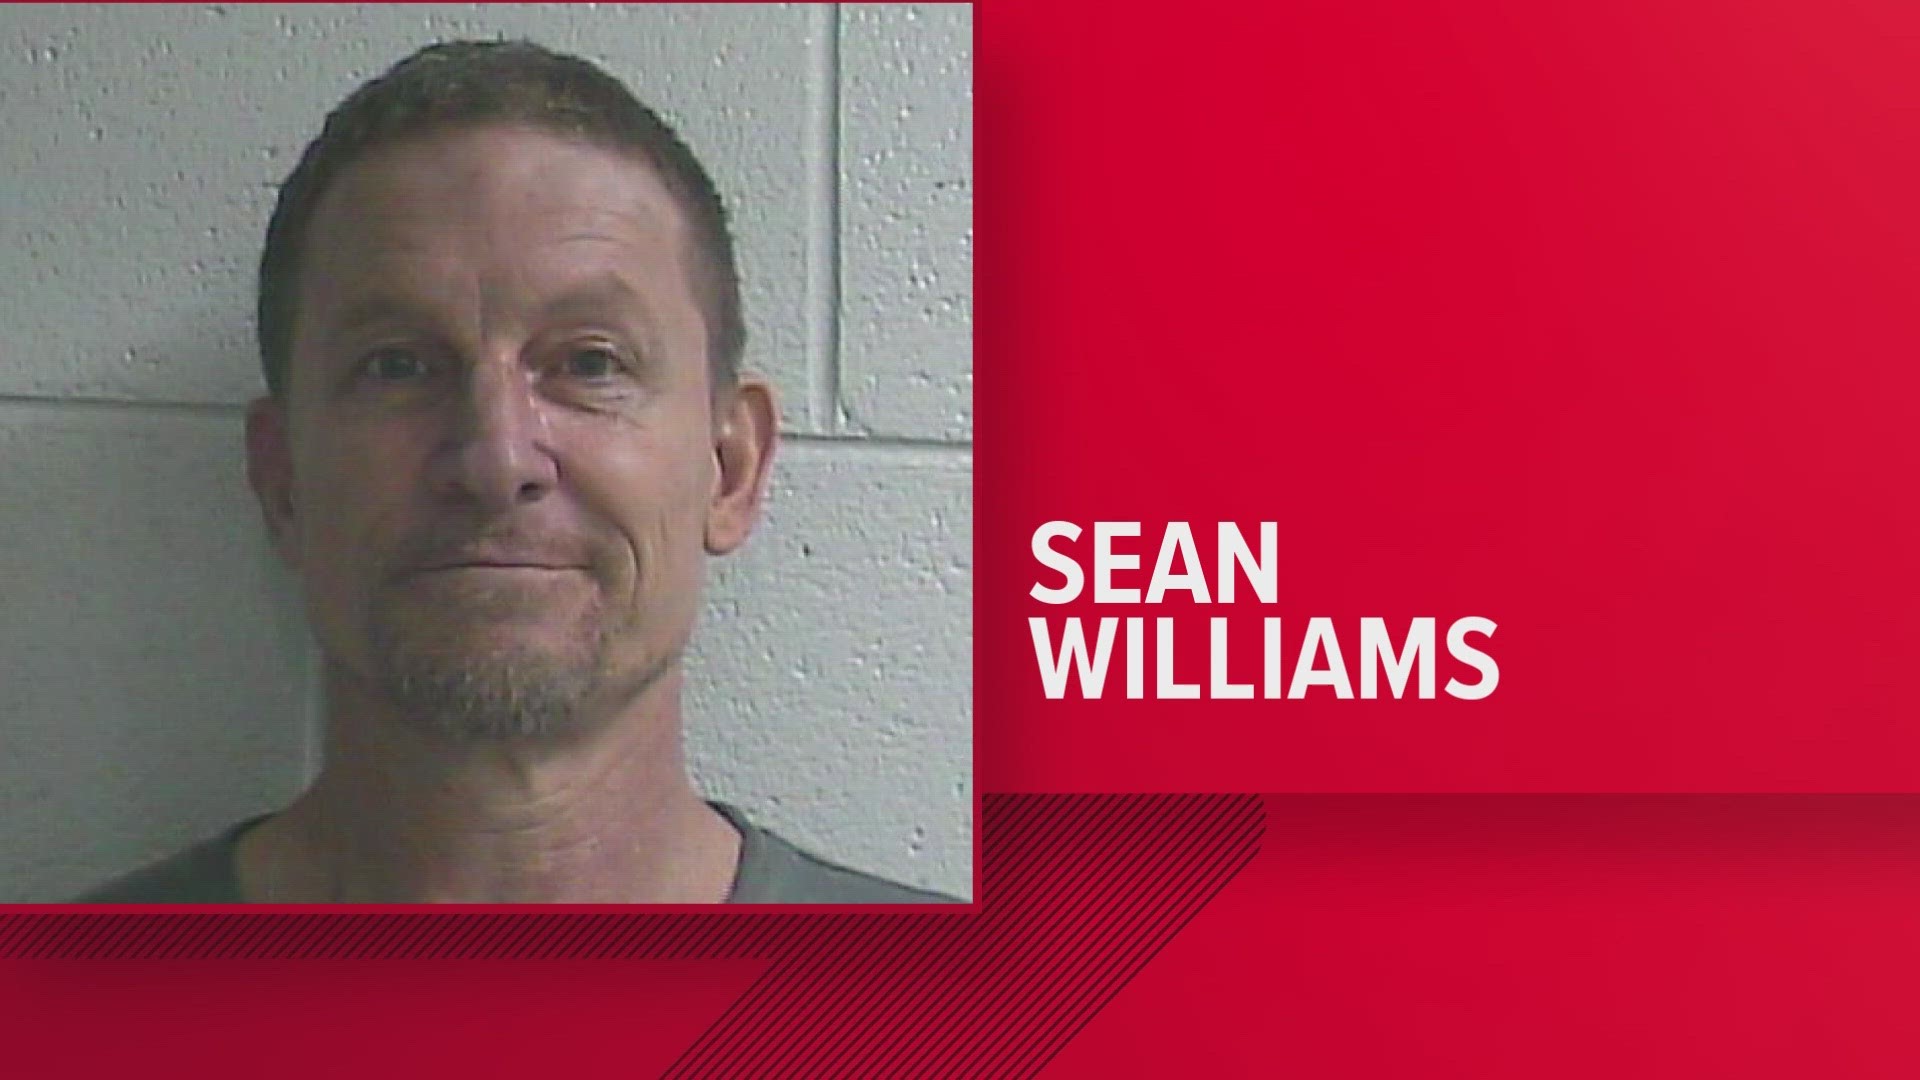 Sean Williams was previously believed to be in the Sylva, North Carolina area. Later, the FBI said he was spotted in Florida.